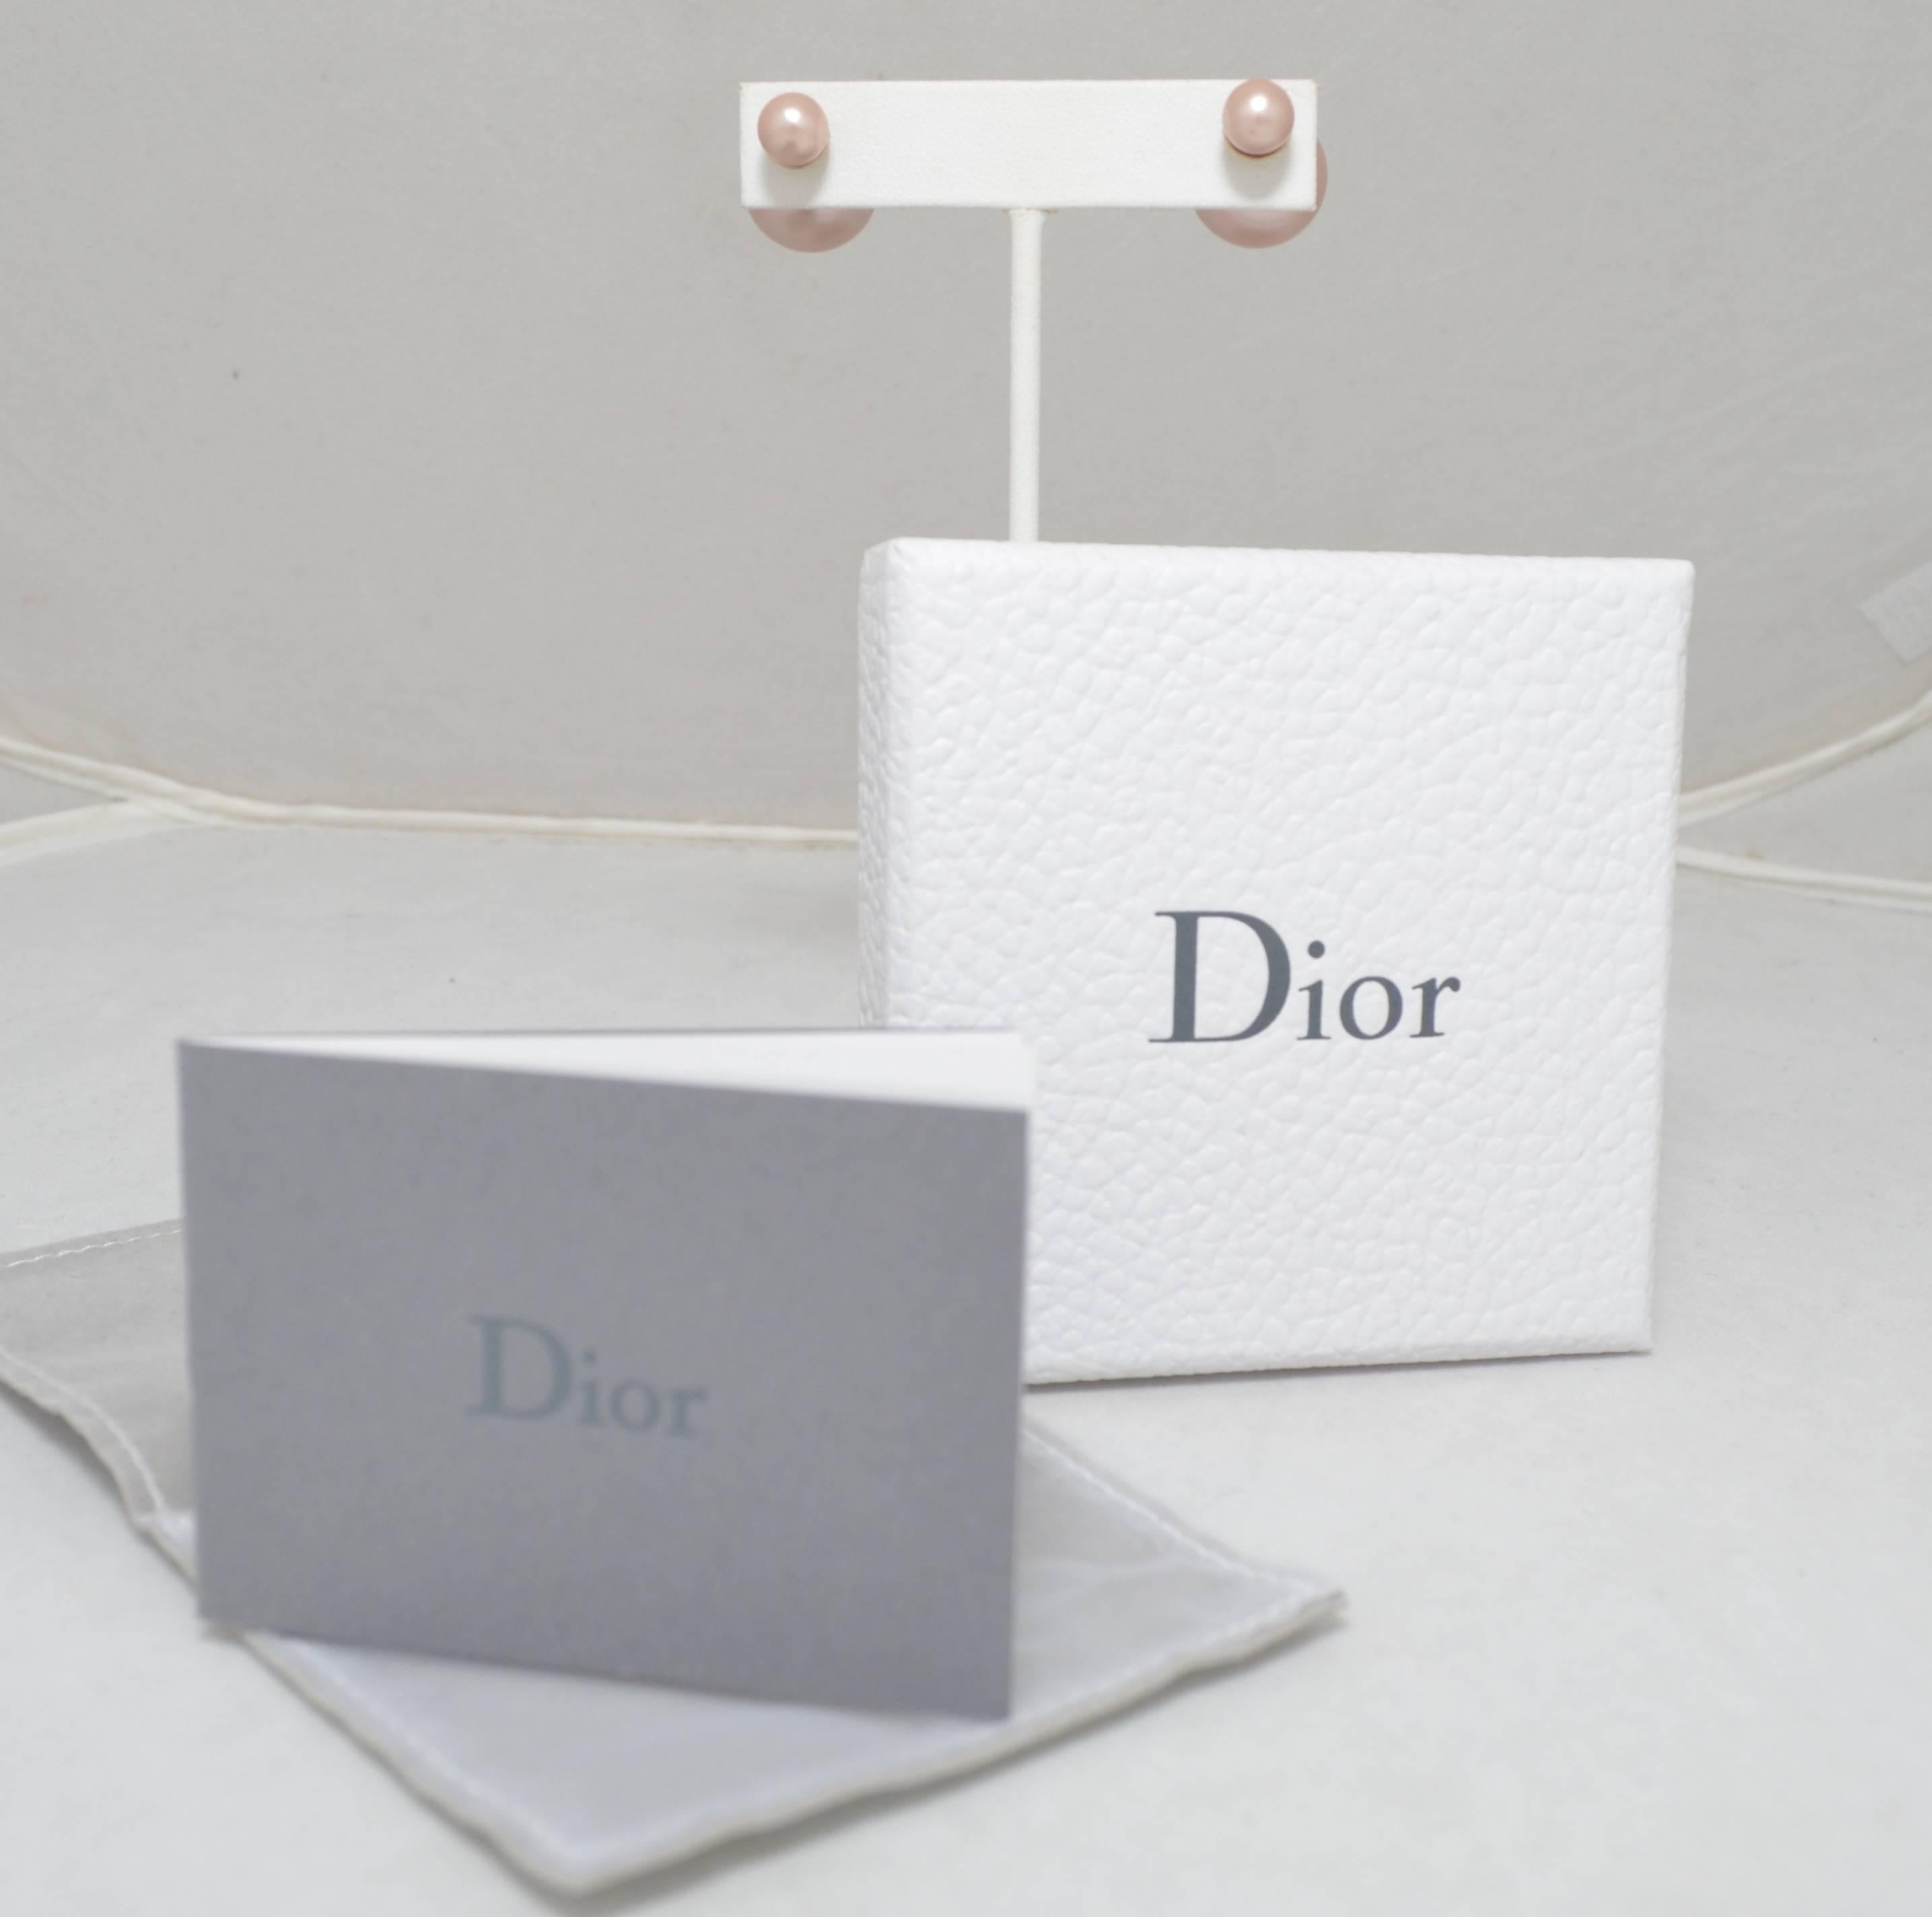 Mise en Dior Tribal earrings. Champagne colored pearl resin beads in asymmetrical sizes. The small pearl rests on the ear while the largest is behind the lobe. Earrings stamped Dior on metal portion of larger ball.
Dior jewelry box, pouch and care